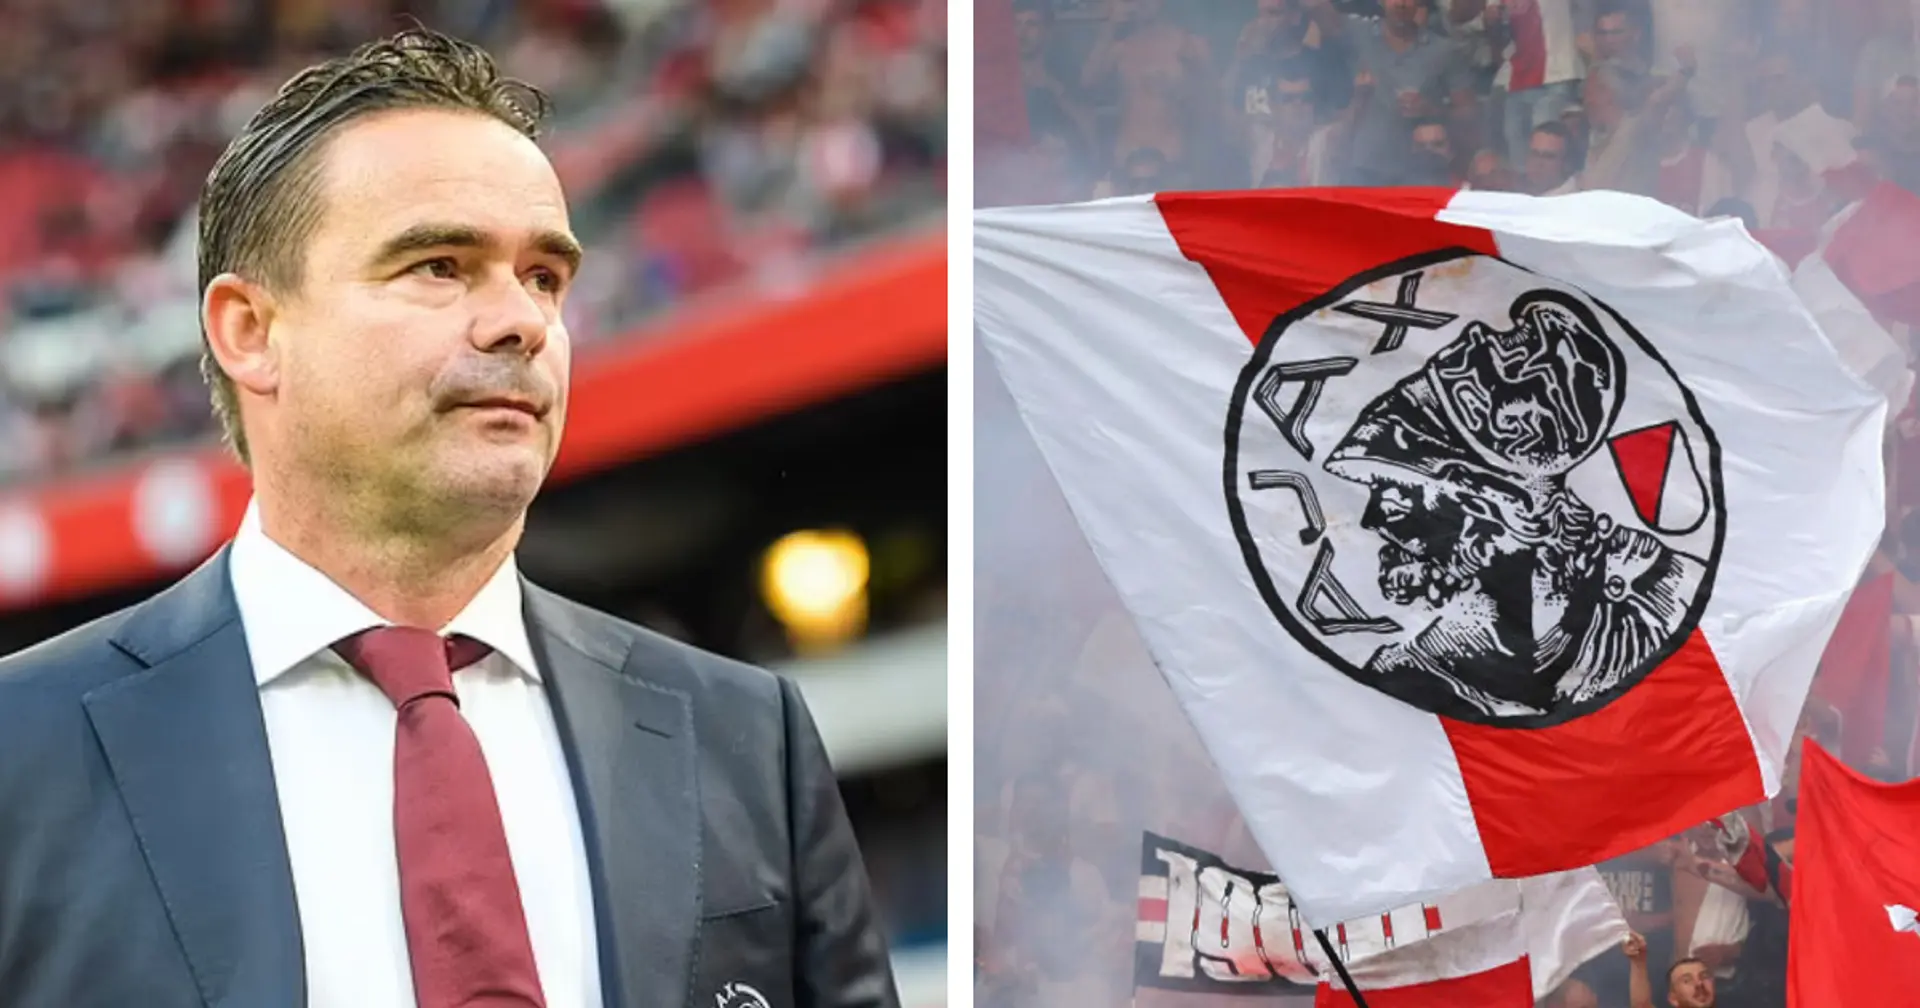 Ajax 'not cooperating' with investigation into Marc Overmars' inappropriate messages to female staff